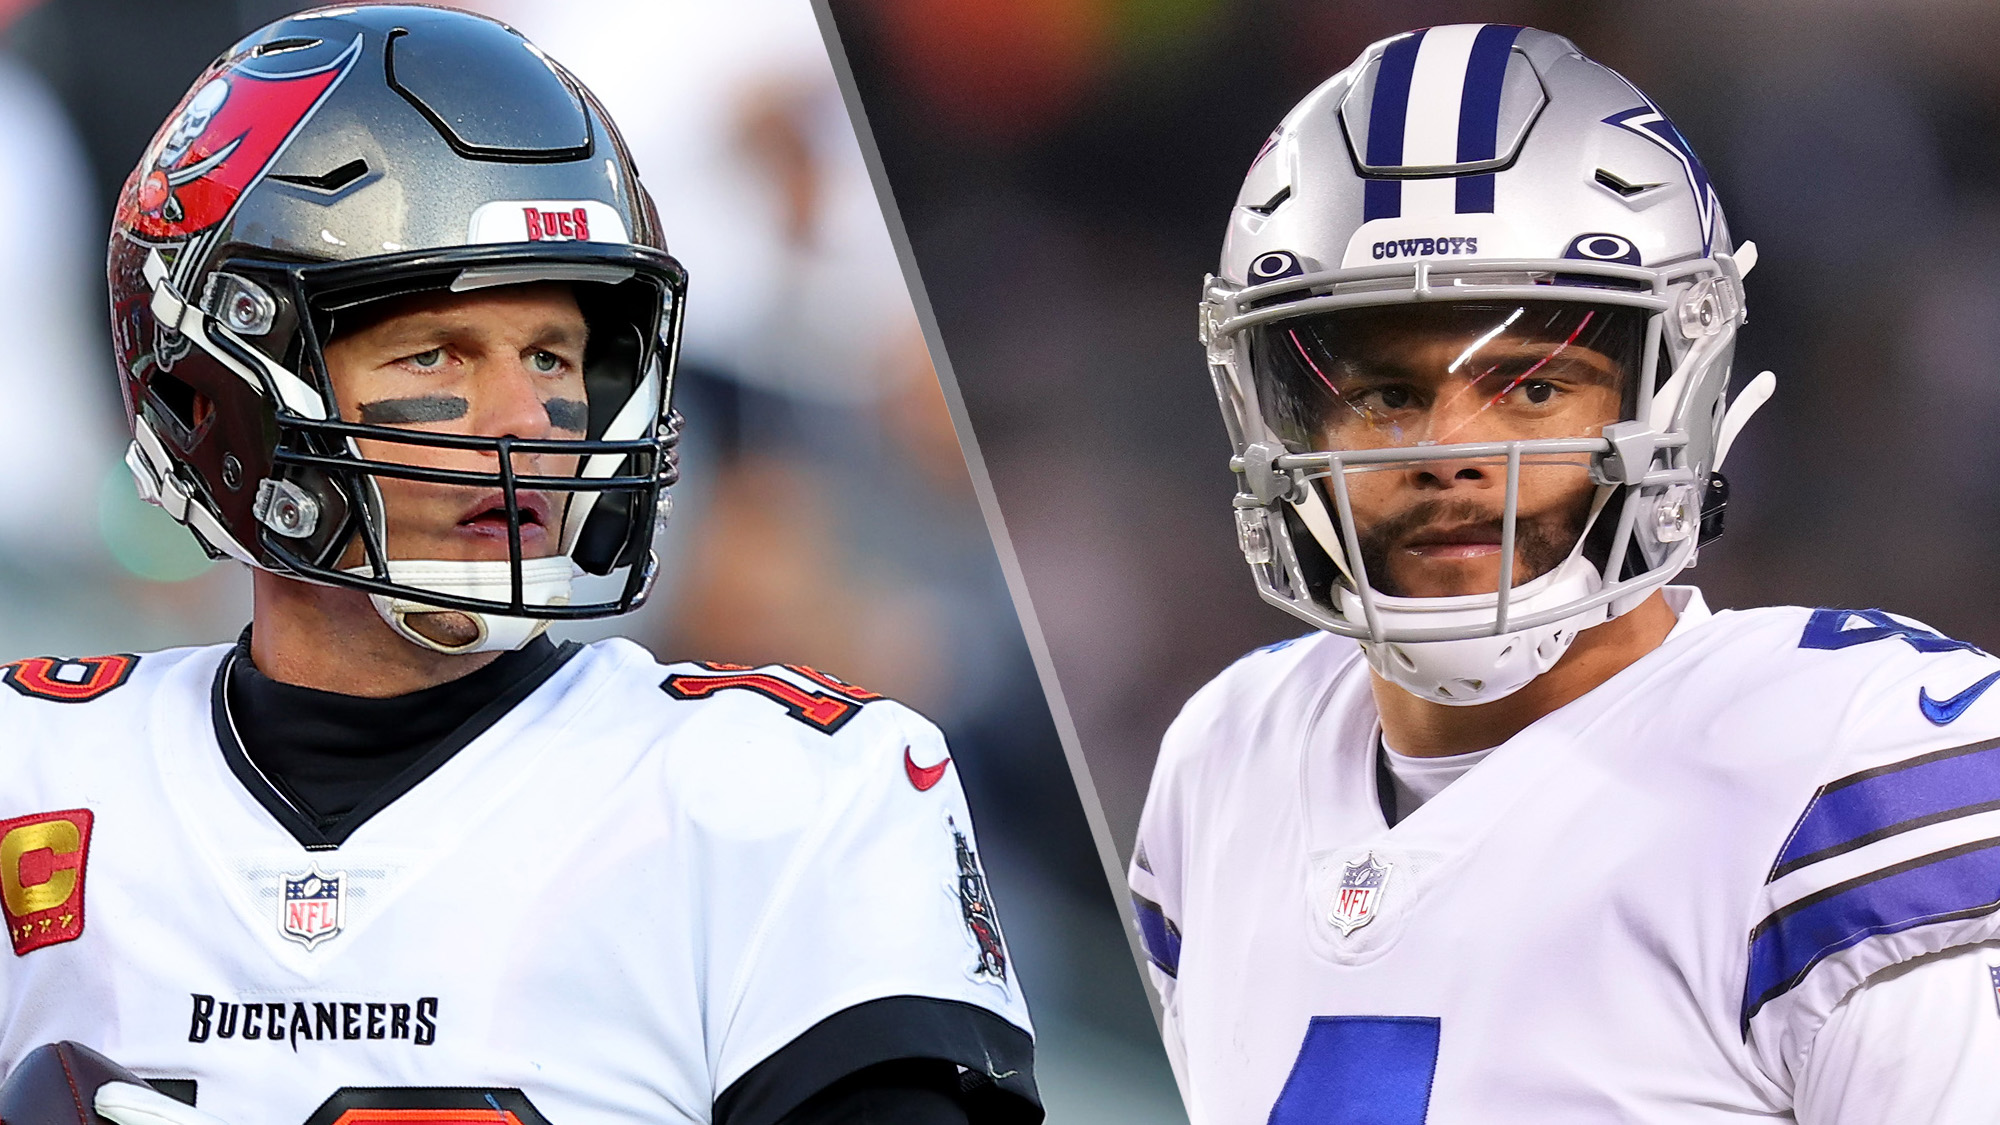 Buccaneers vs Cowboys live stream: How to watch Sunday Night Football online  tonight